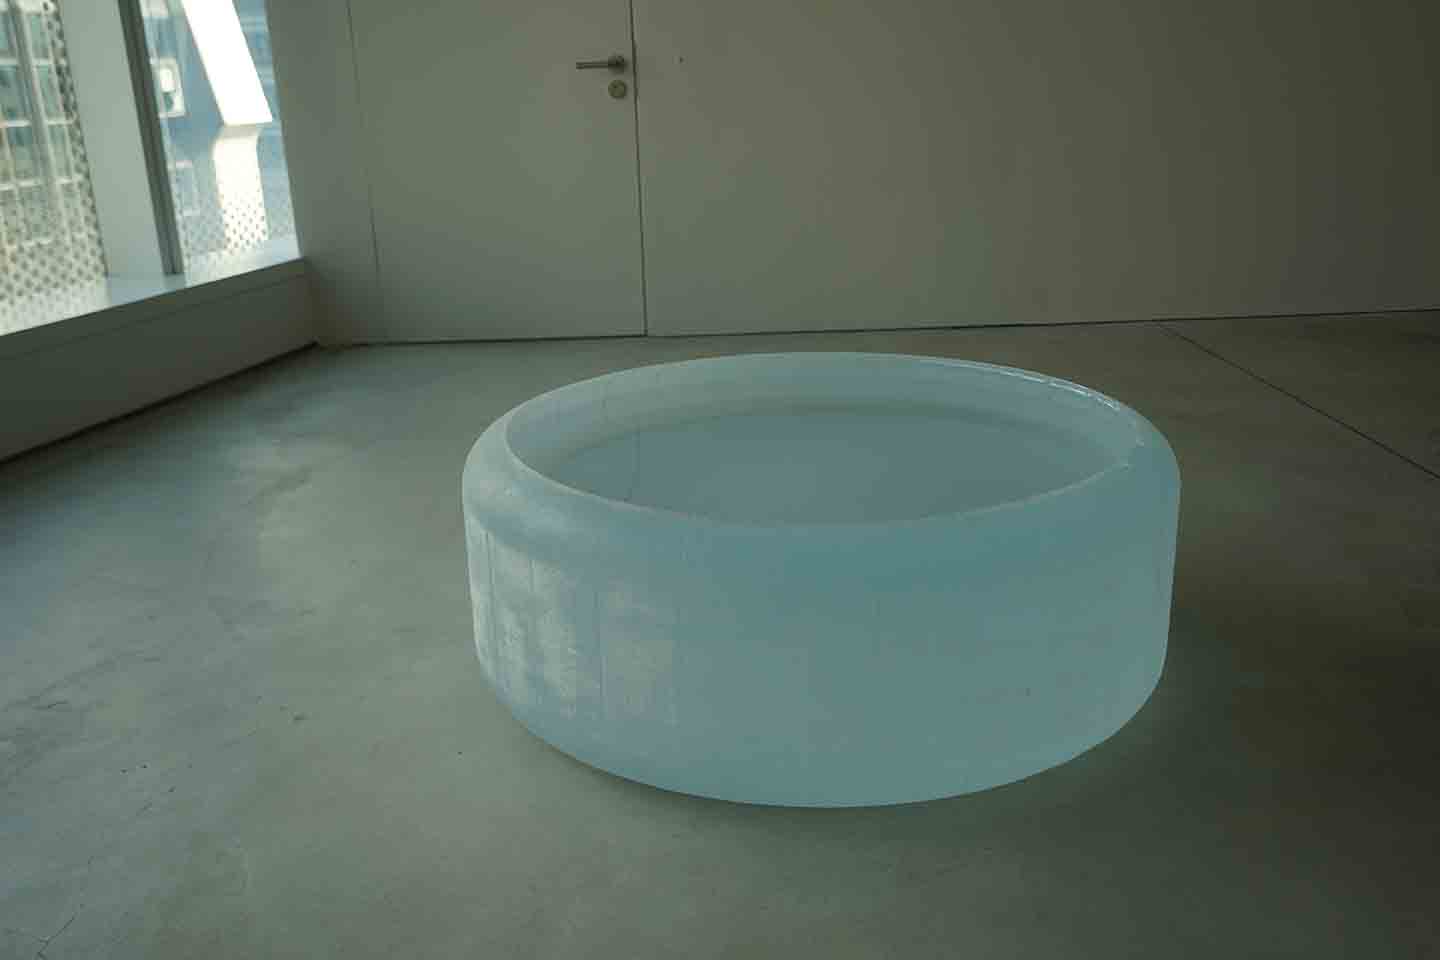 Sculpture by Roni Horn, in her exhibition at Hauser & Wirth, H Queen's